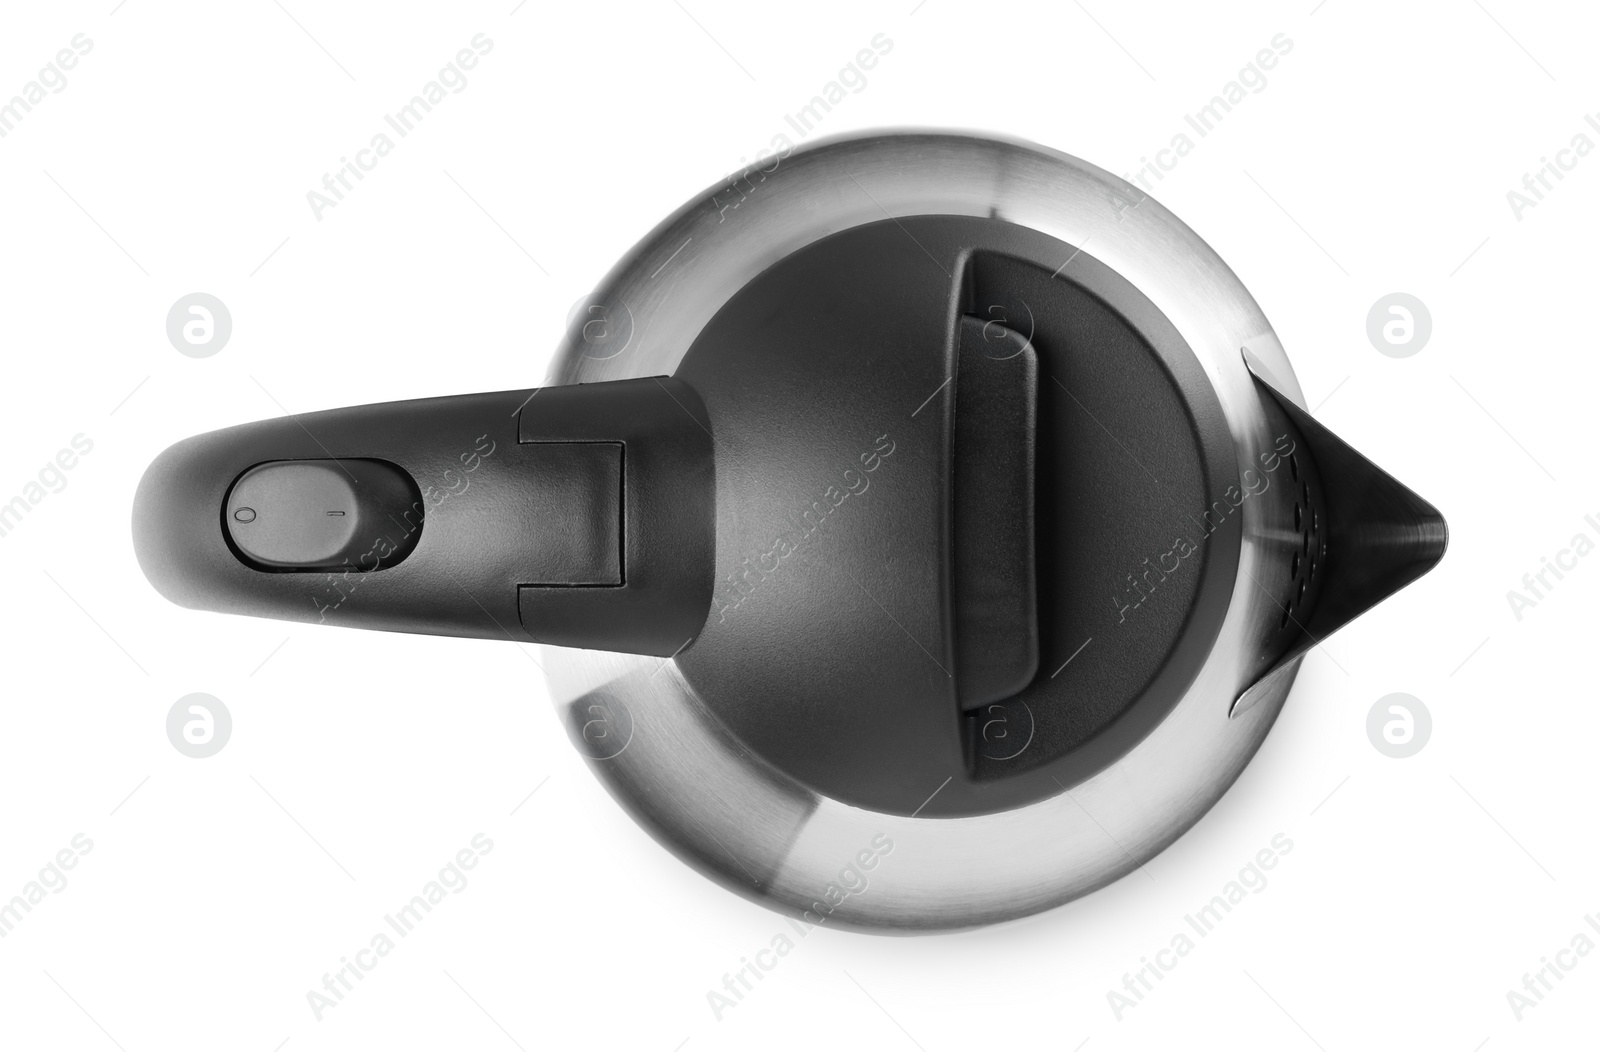 Photo of Stylish electrical kettle isolated on white, top view